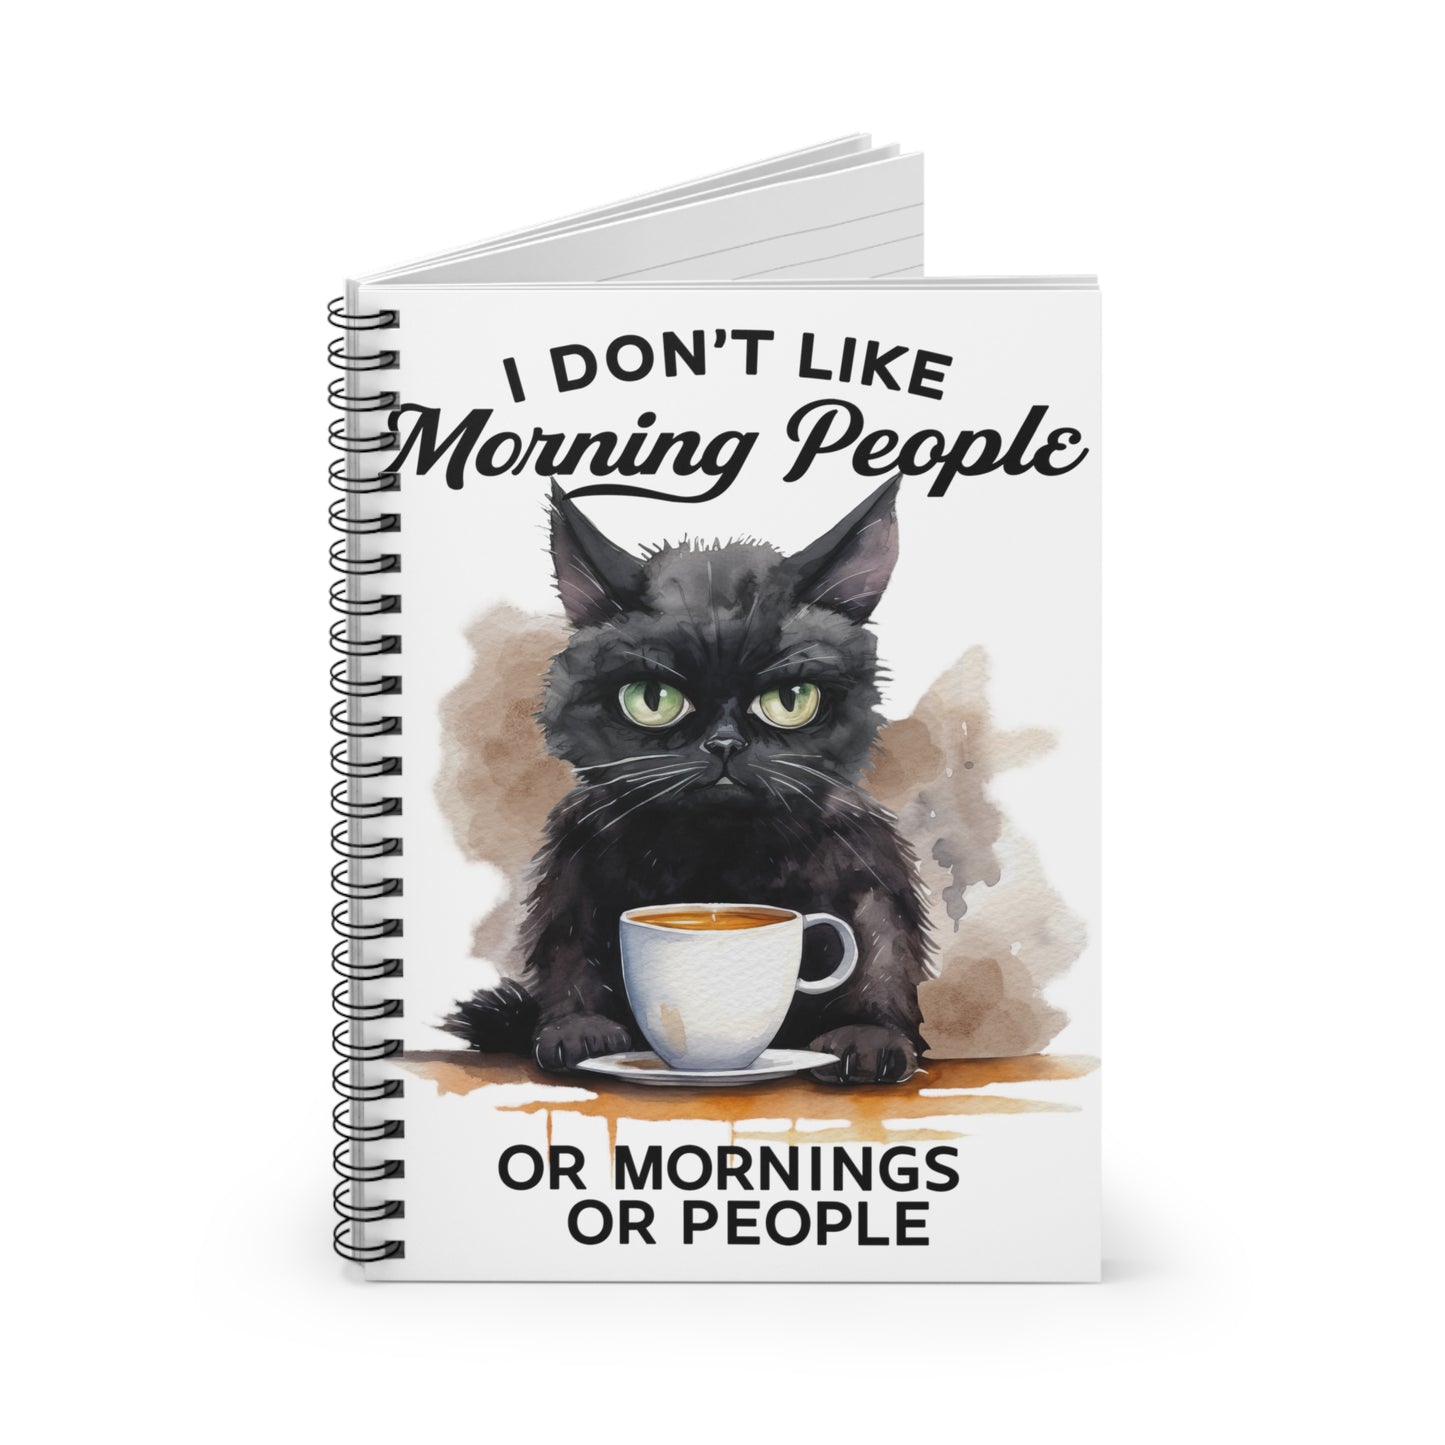 No mornings no people Spiral Notebook - Ruled Line